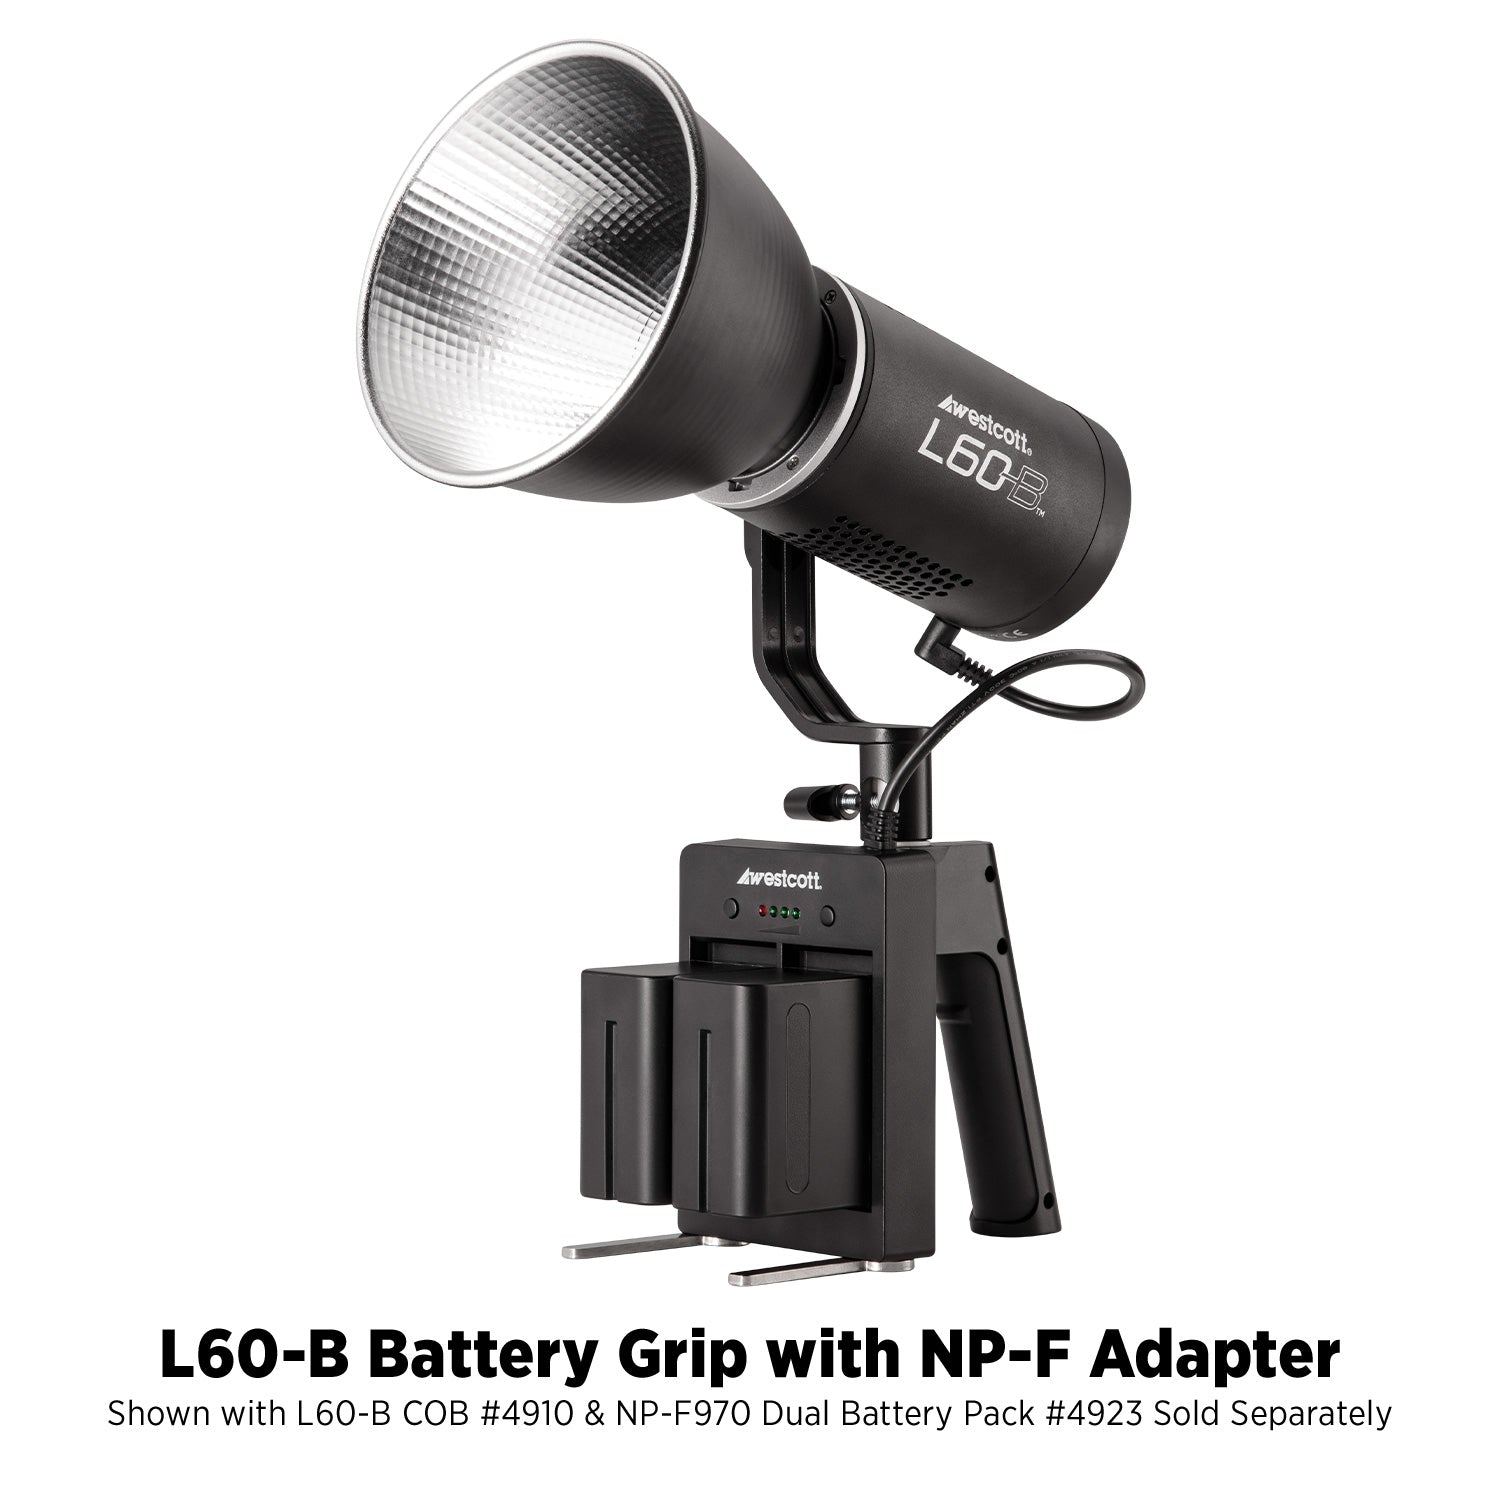 L60-B Battery Grip with NP-F Adapter